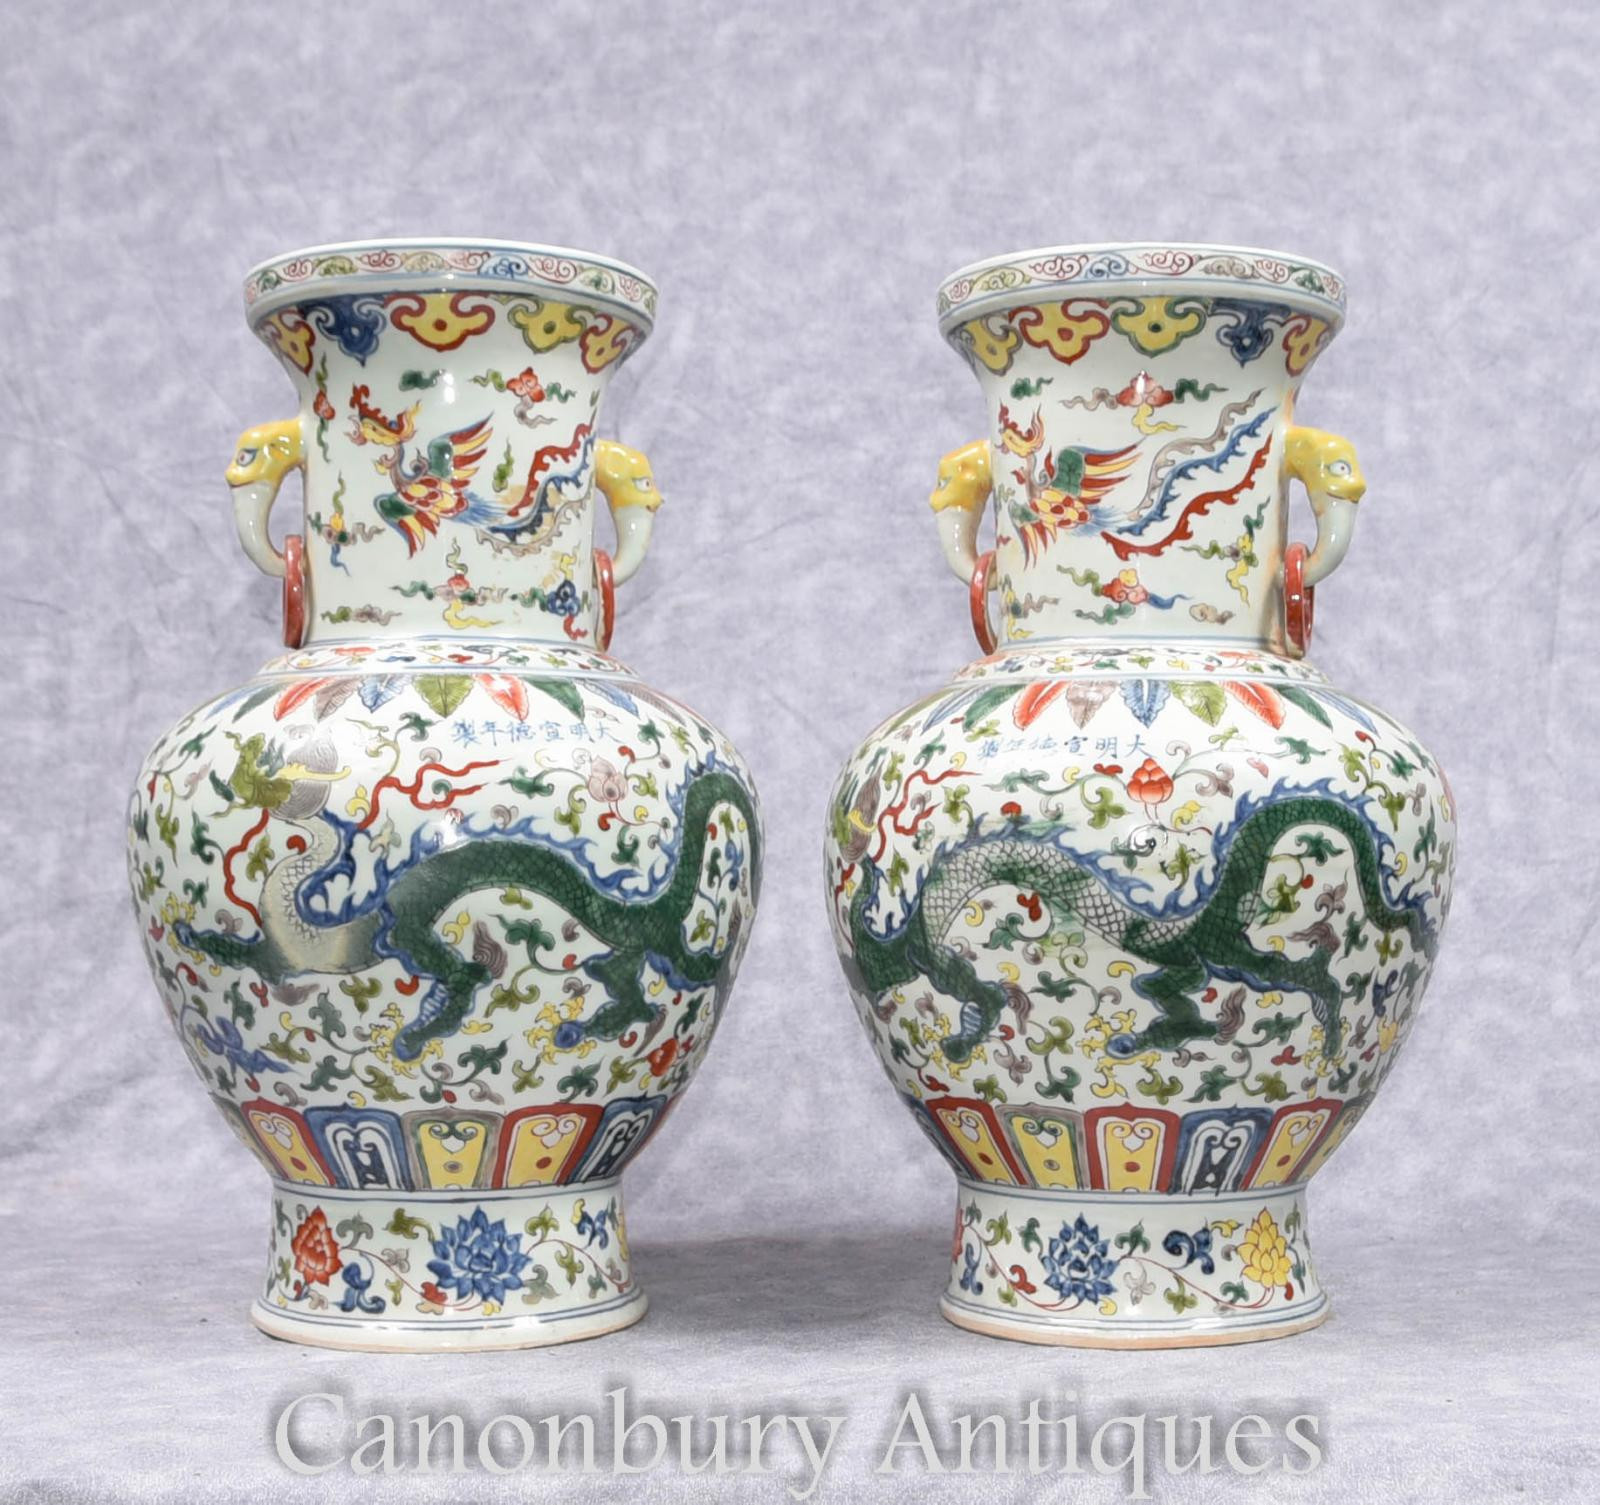 blue and white porcelain vases for sale of pair chinese qianlong porcelain vases dragon urns ceramic china ebay within please contact us if you would like to view any of these items at our showroom